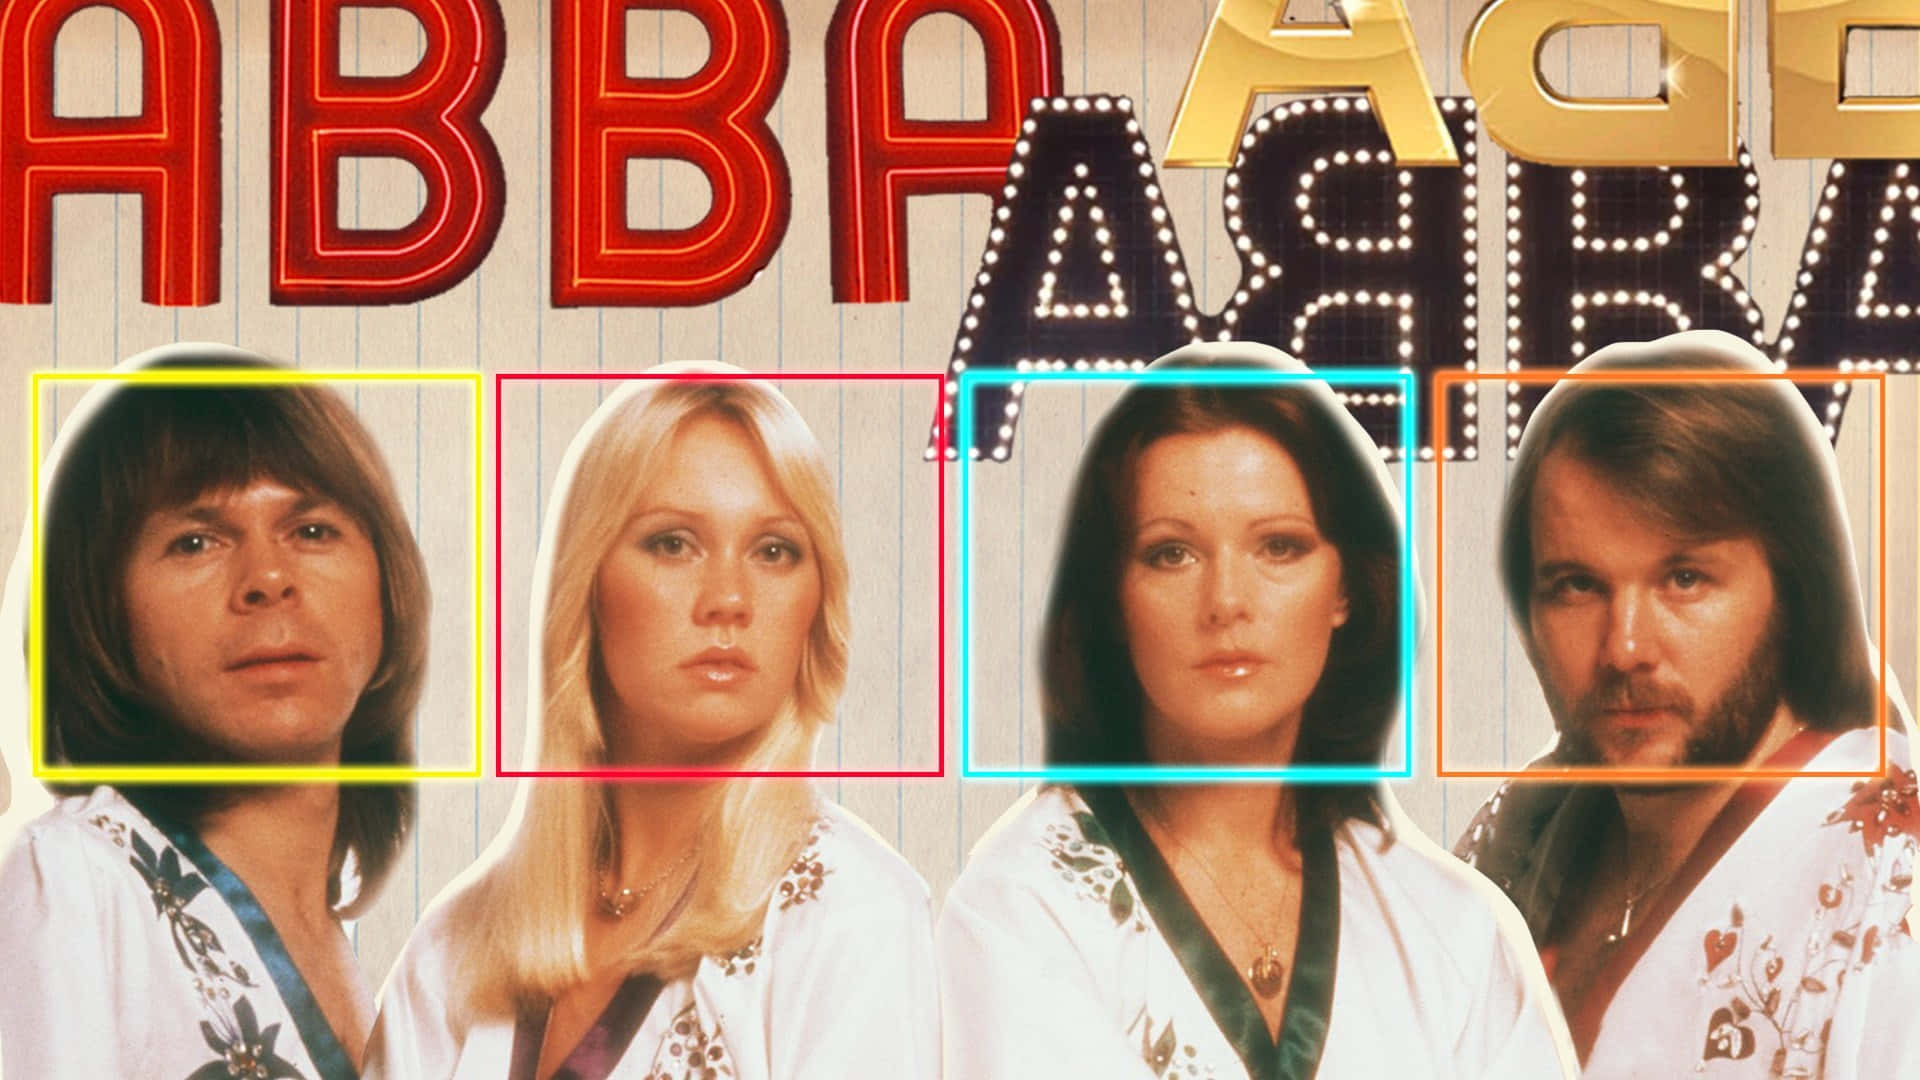 Abba Abba - A Group Of People In Different Colors